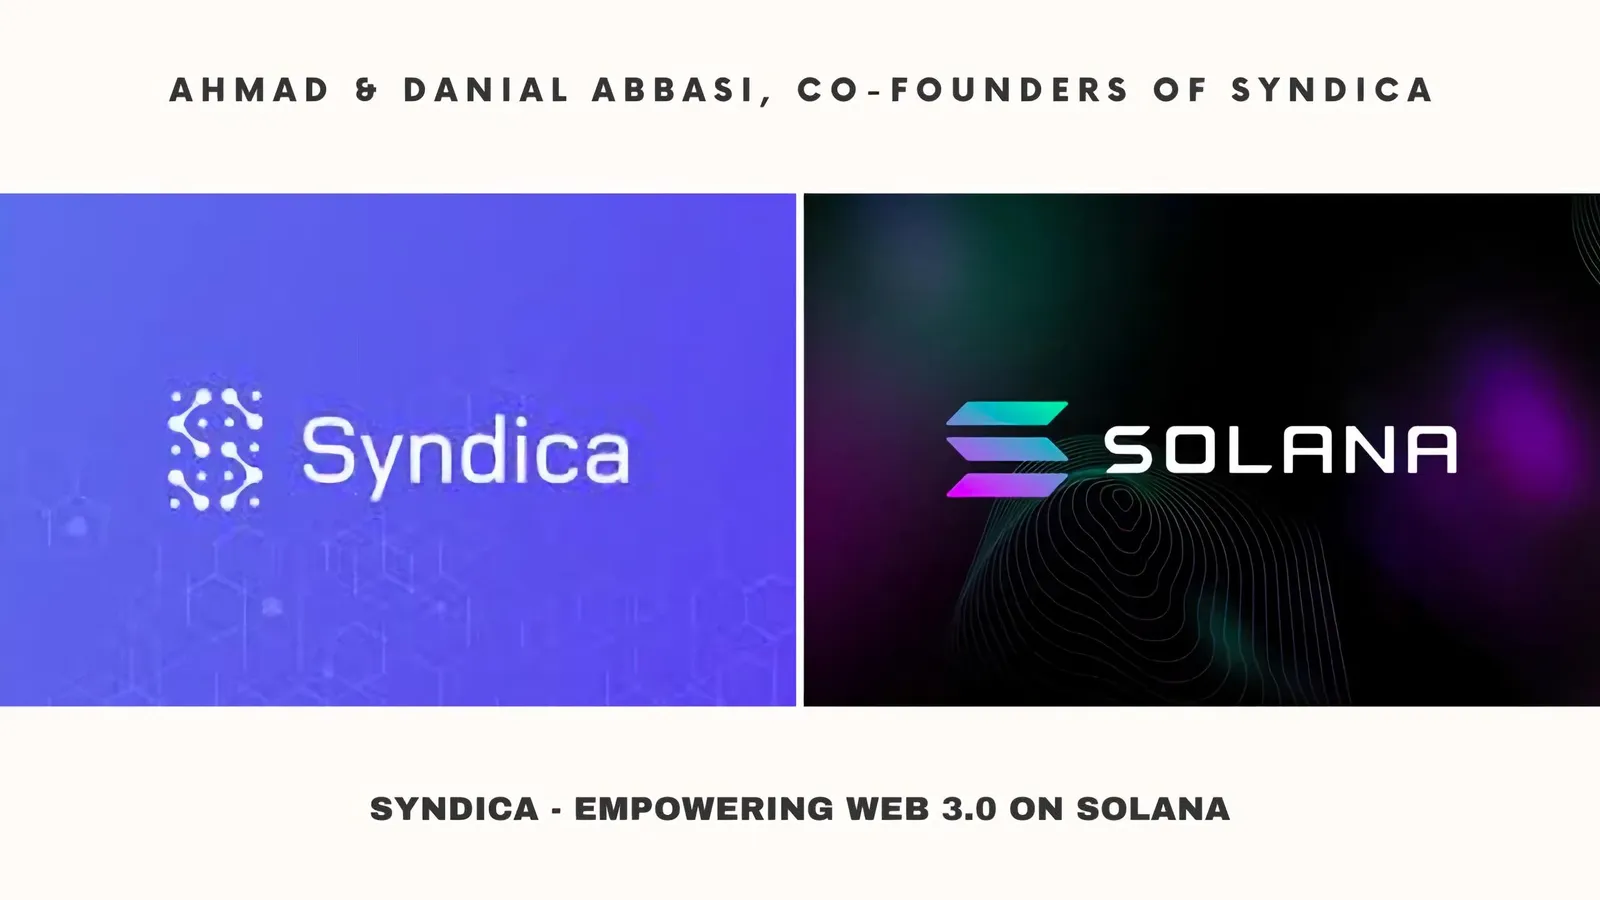 Syndica - Empowering Web 3.0 on Solana